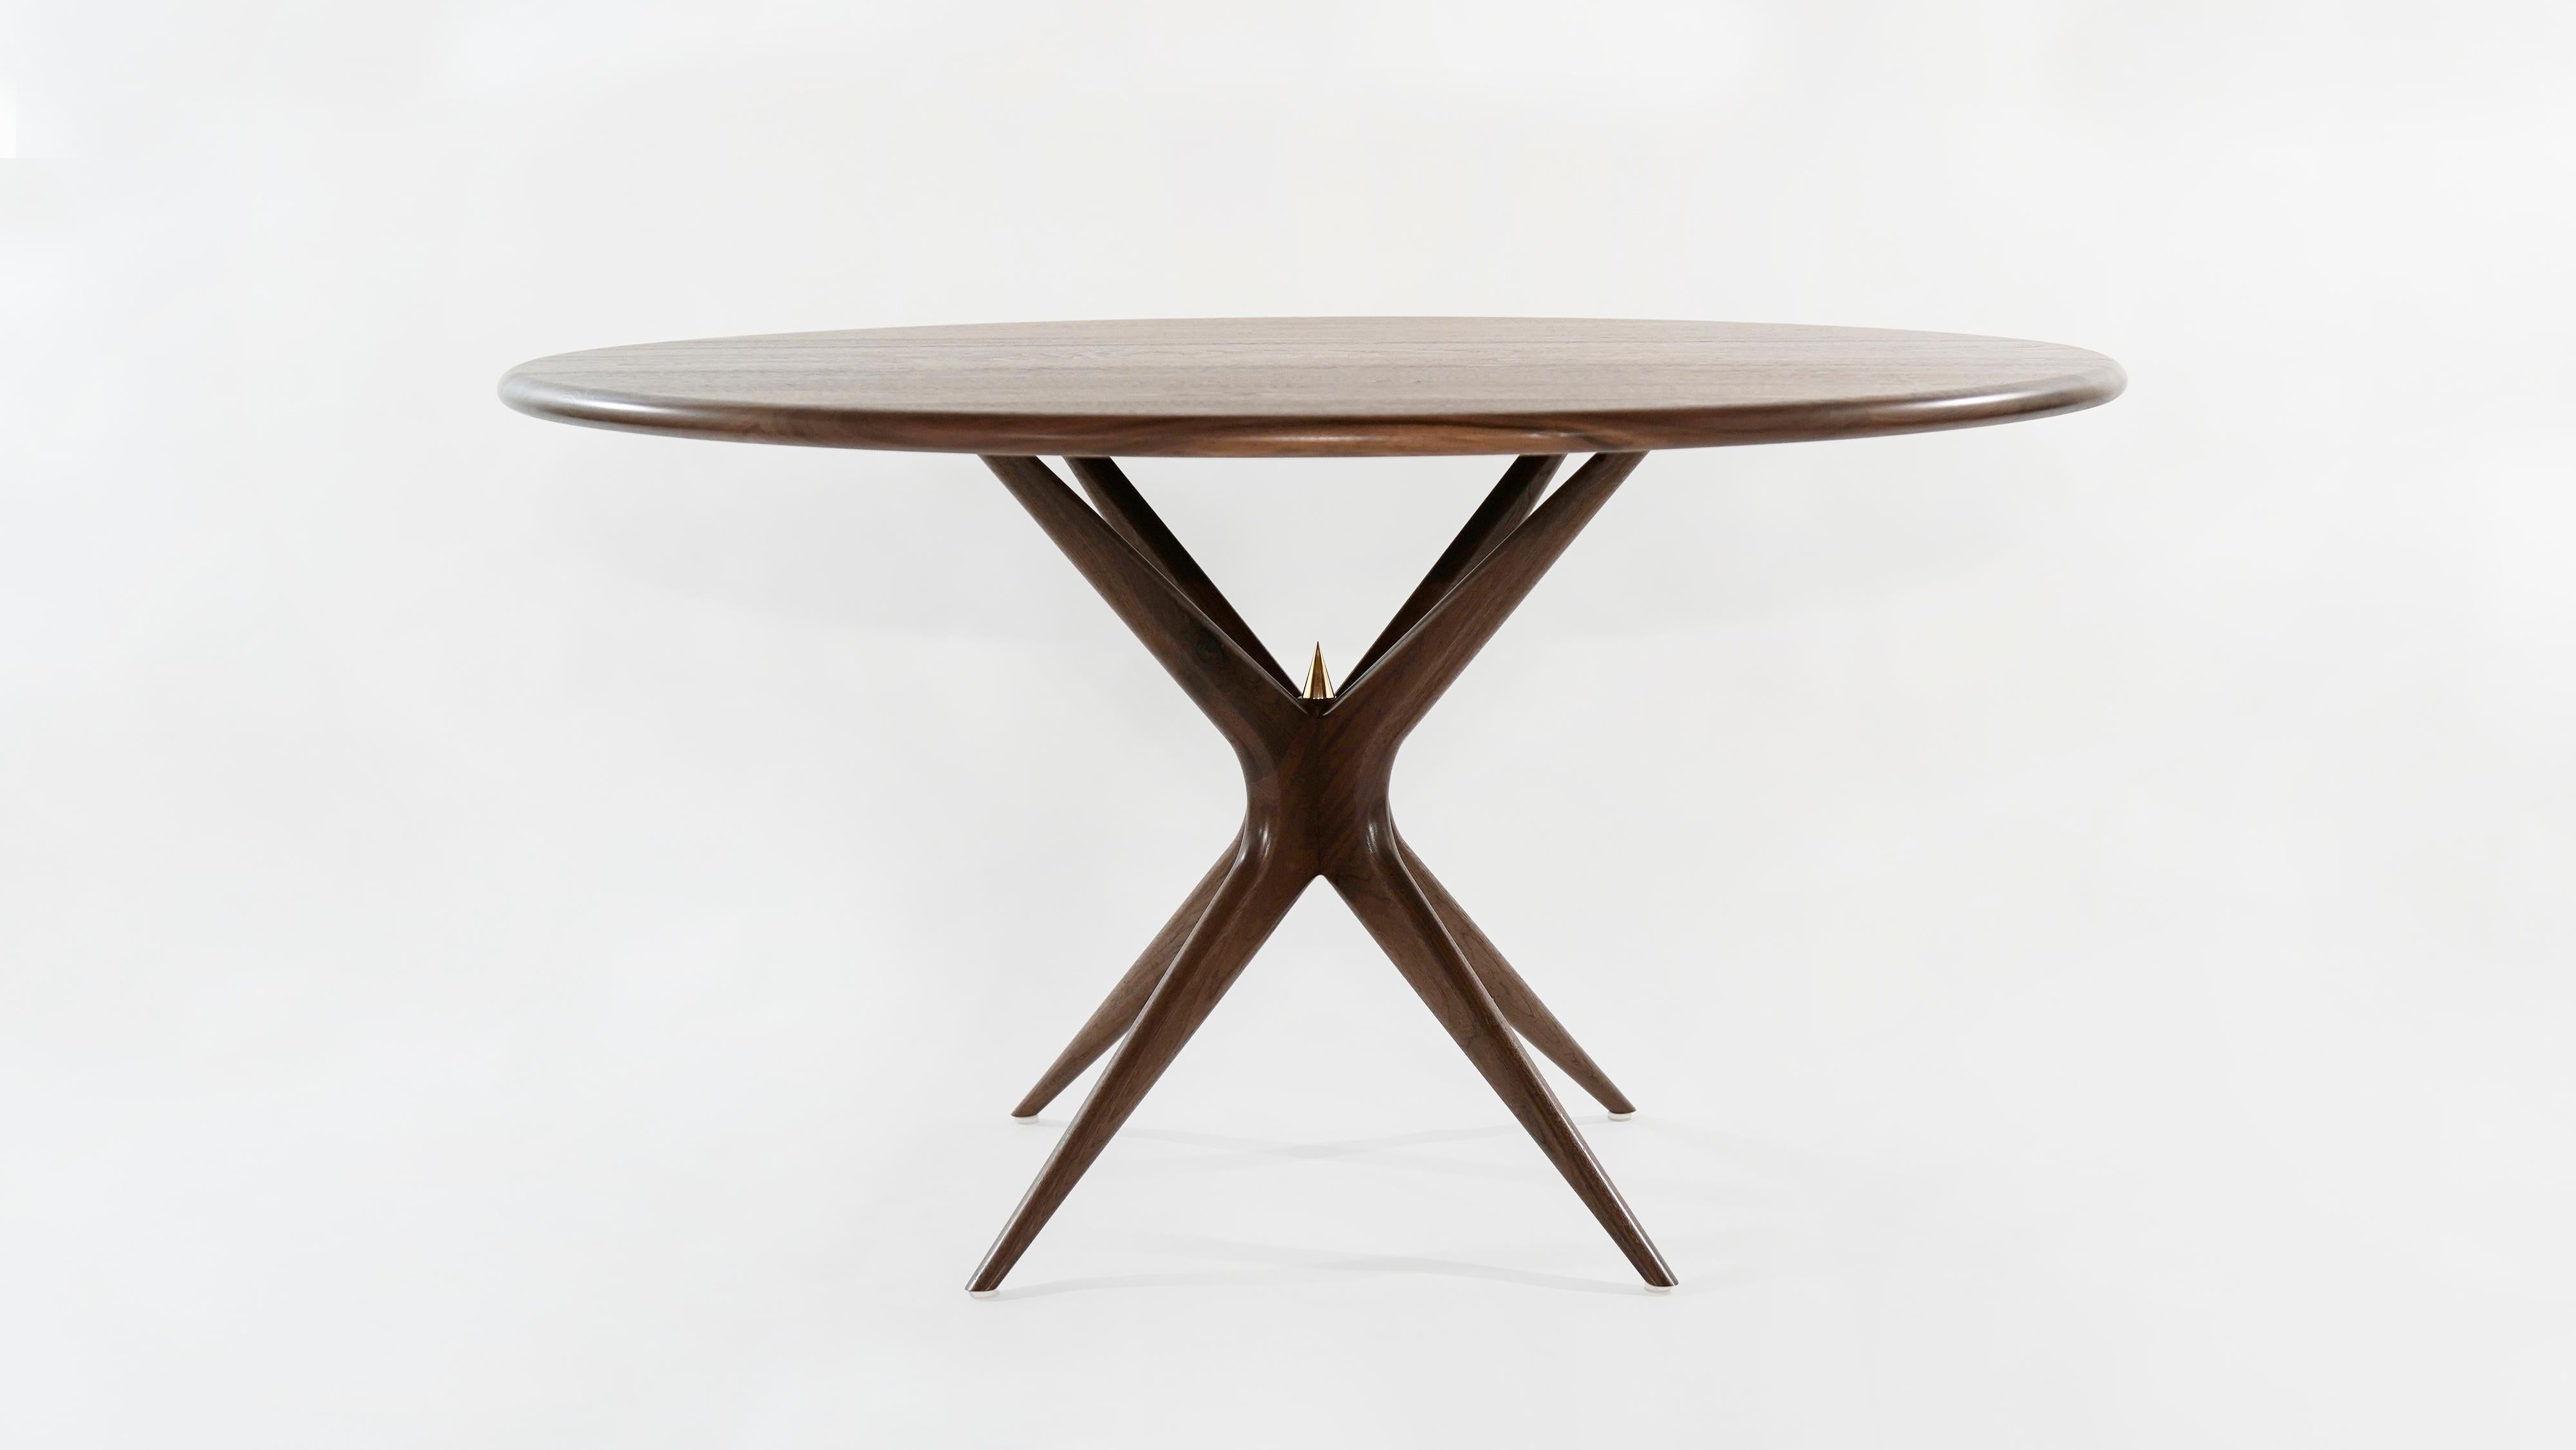 Introducing The Gazelle Dining Table by Carlos Solano, a captivating addition to Stamford Modern's expanding collection of Mid-Century inspired, fully customizable furniture. This exquisite table effortlessly marries demure curves with unexpected